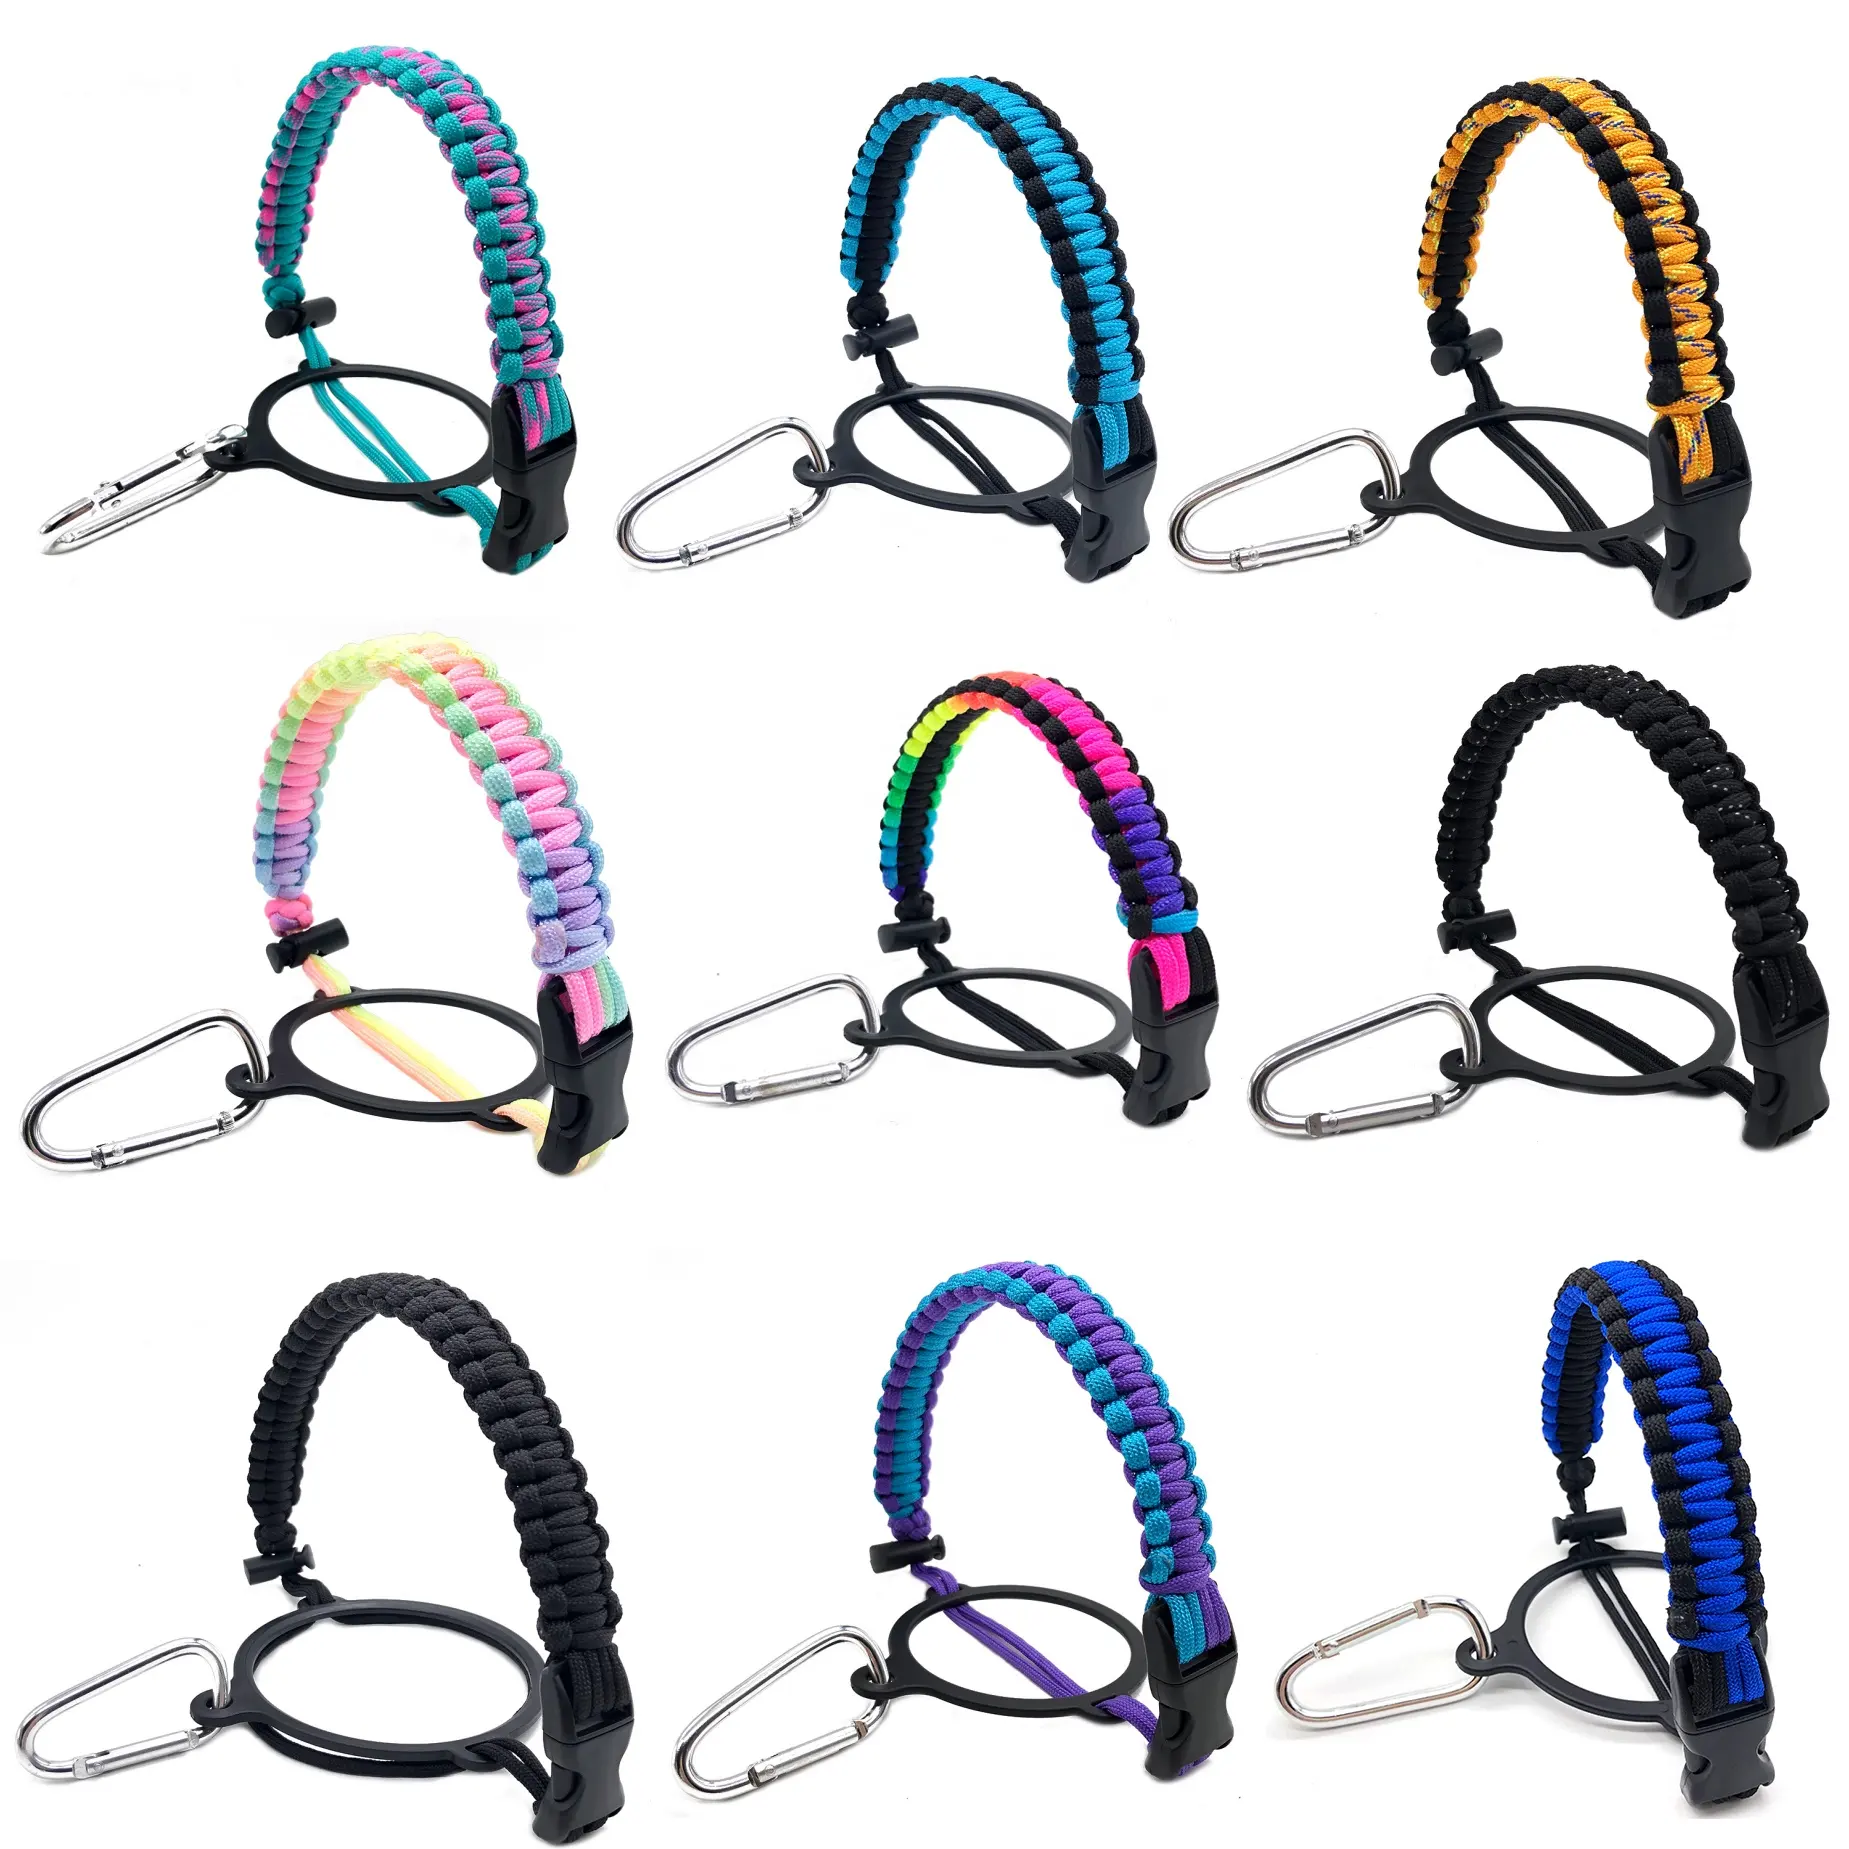 Customized Colorful Sport Paracord Weave Handle For Wide Mouth Water Bottle Holder